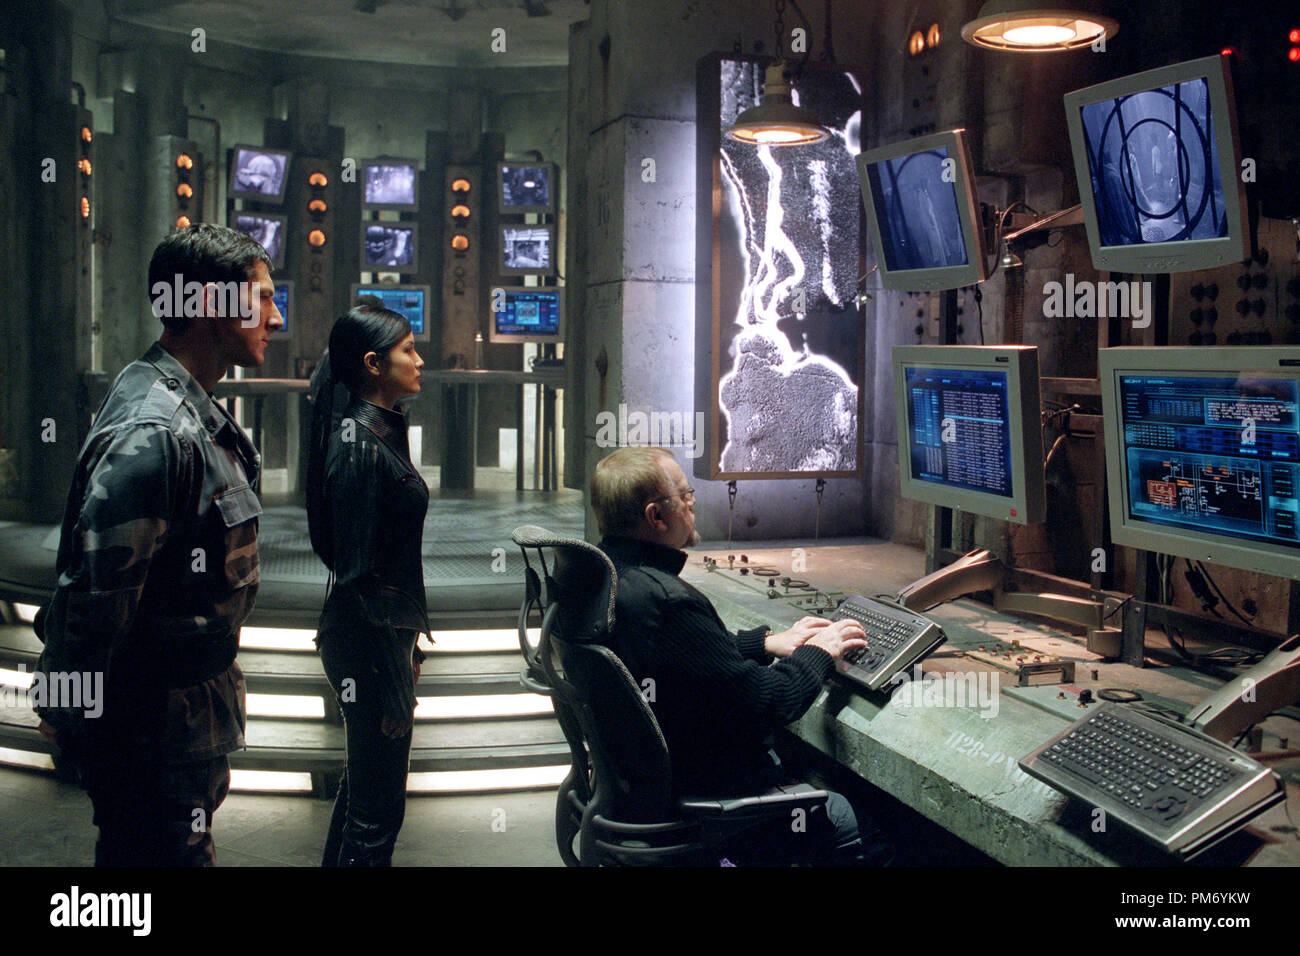 Studio Publicity Still from 'X2' Peter Wingfield, Kelly Hu, Brian Cox © 2003 20th Century Fox Photo by Kerry Hayes    File Reference # 307531031THA  For Editorial Use Only -  All Rights Reserved Stock Photo